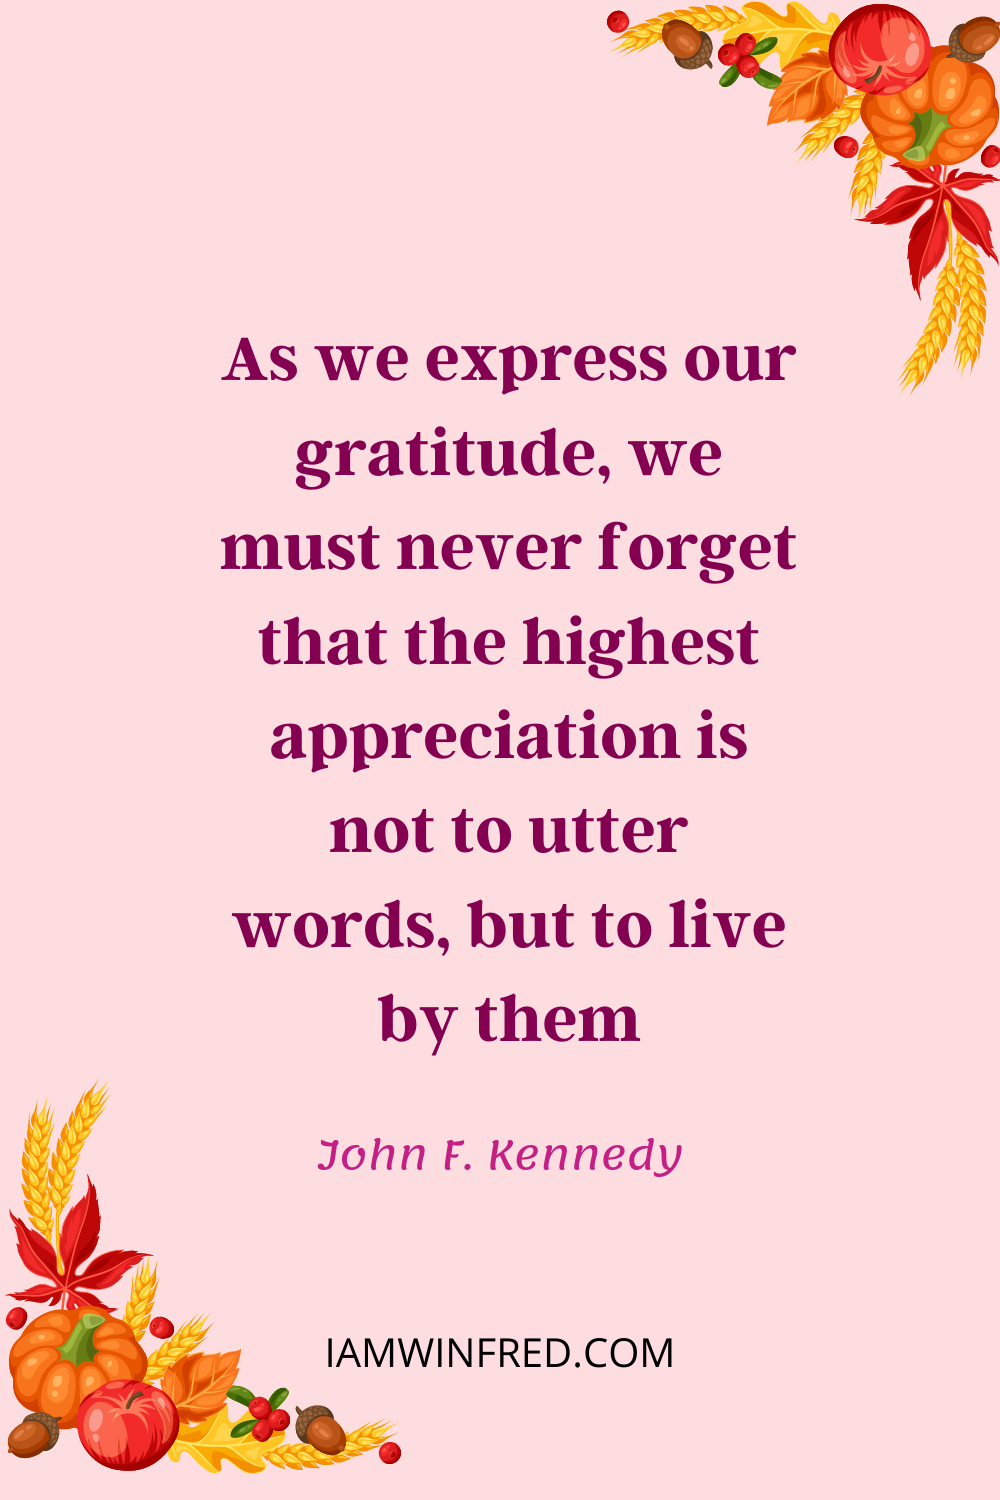 As We Express Our Gratitude We Must Never Forget That The Highest Appreciation Is Not To Utter Words But To Live By Them